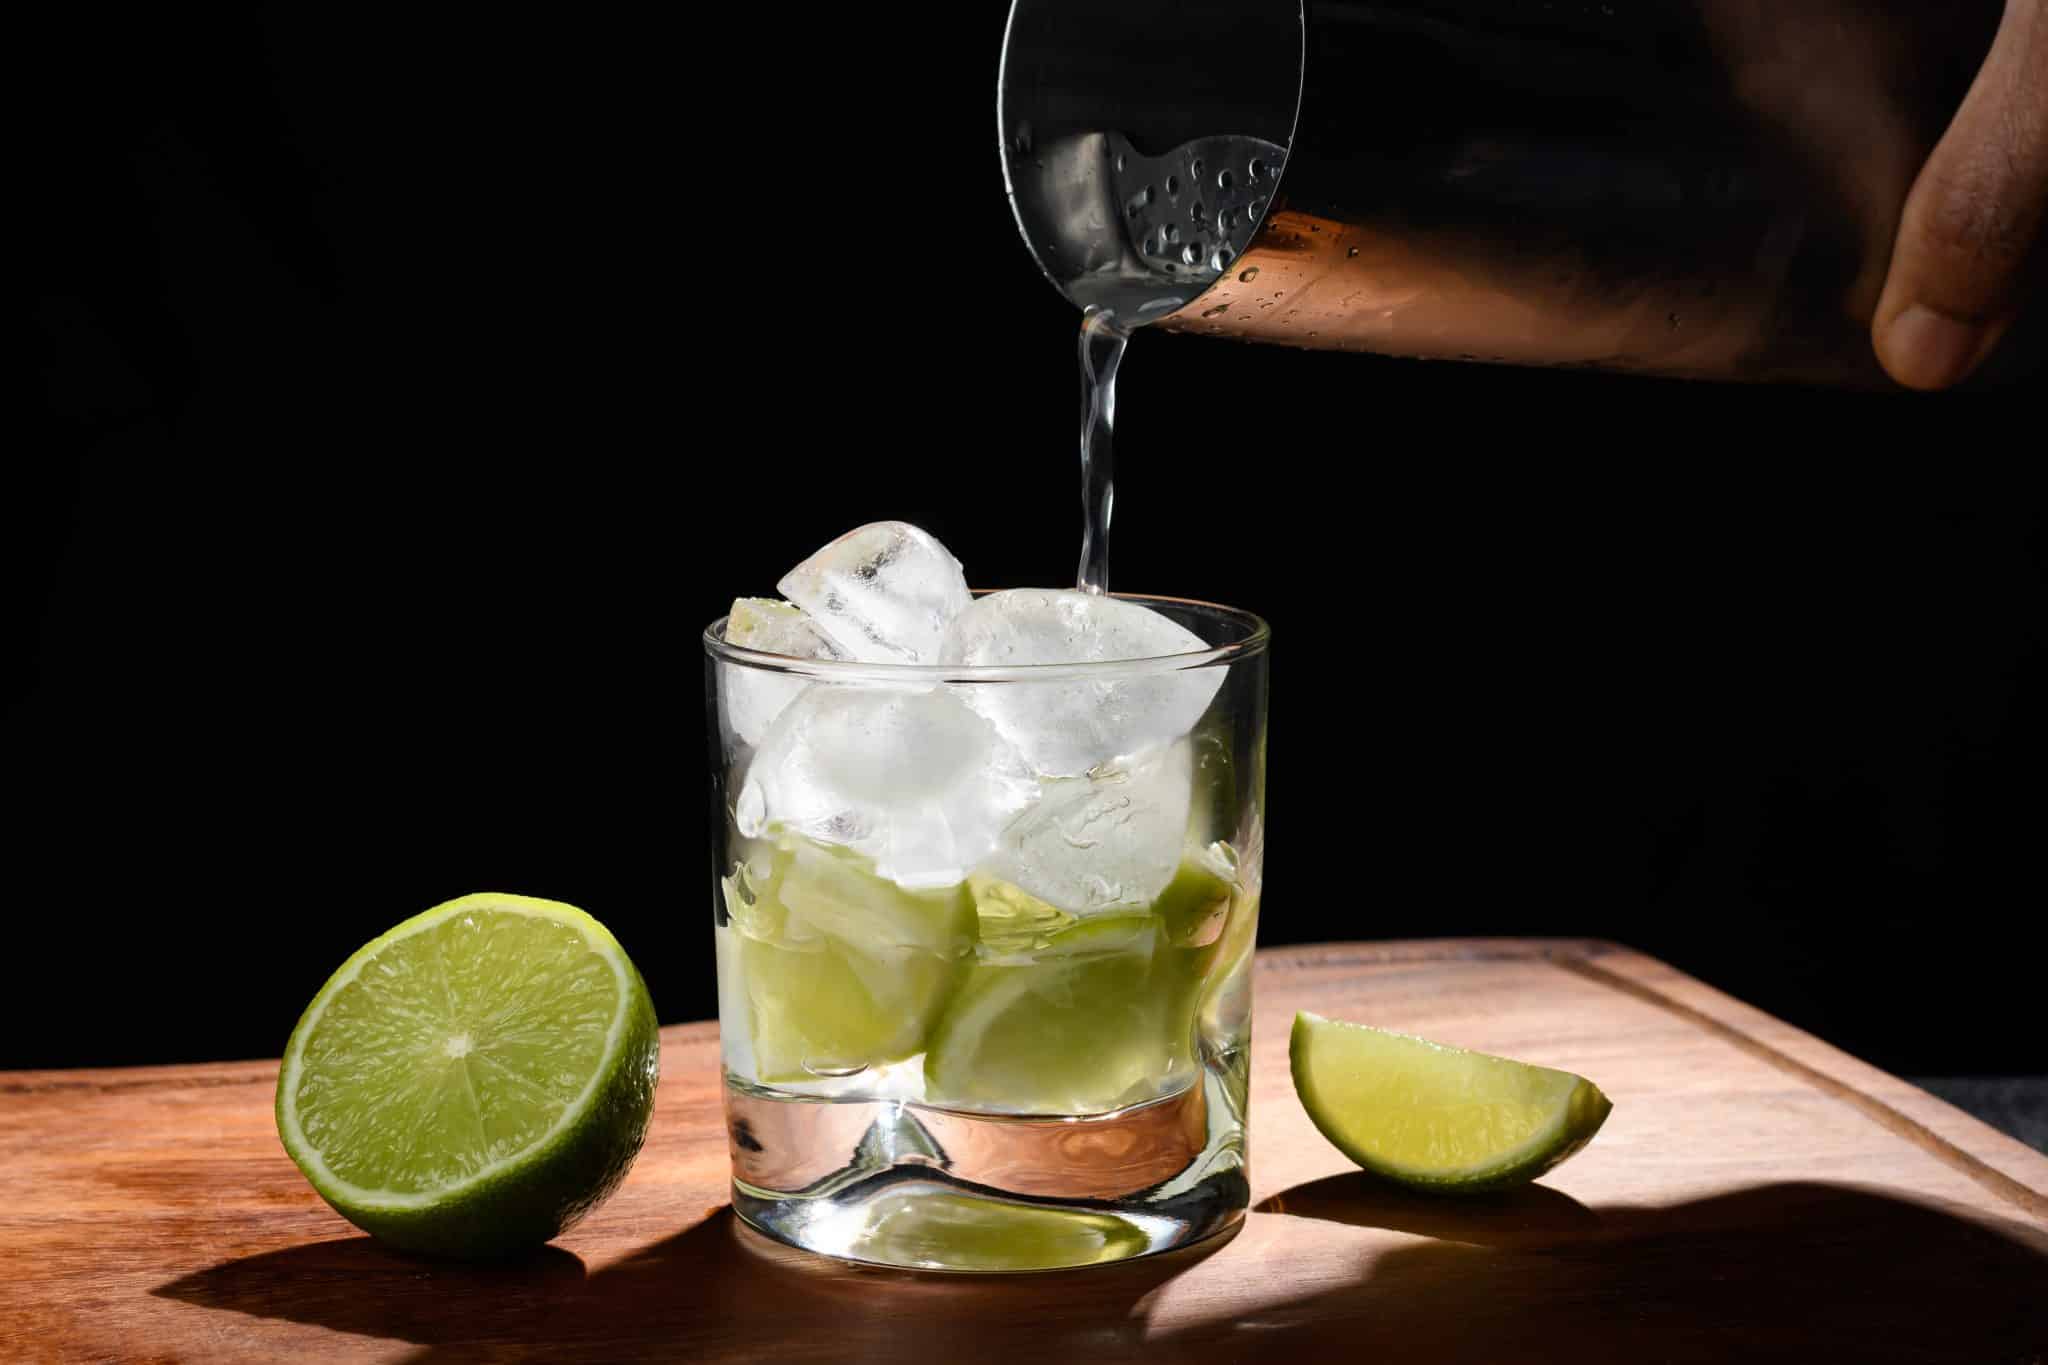 Pouring cachaça into a glass with ice and lime wedges on a wooden surface, with a dark background.